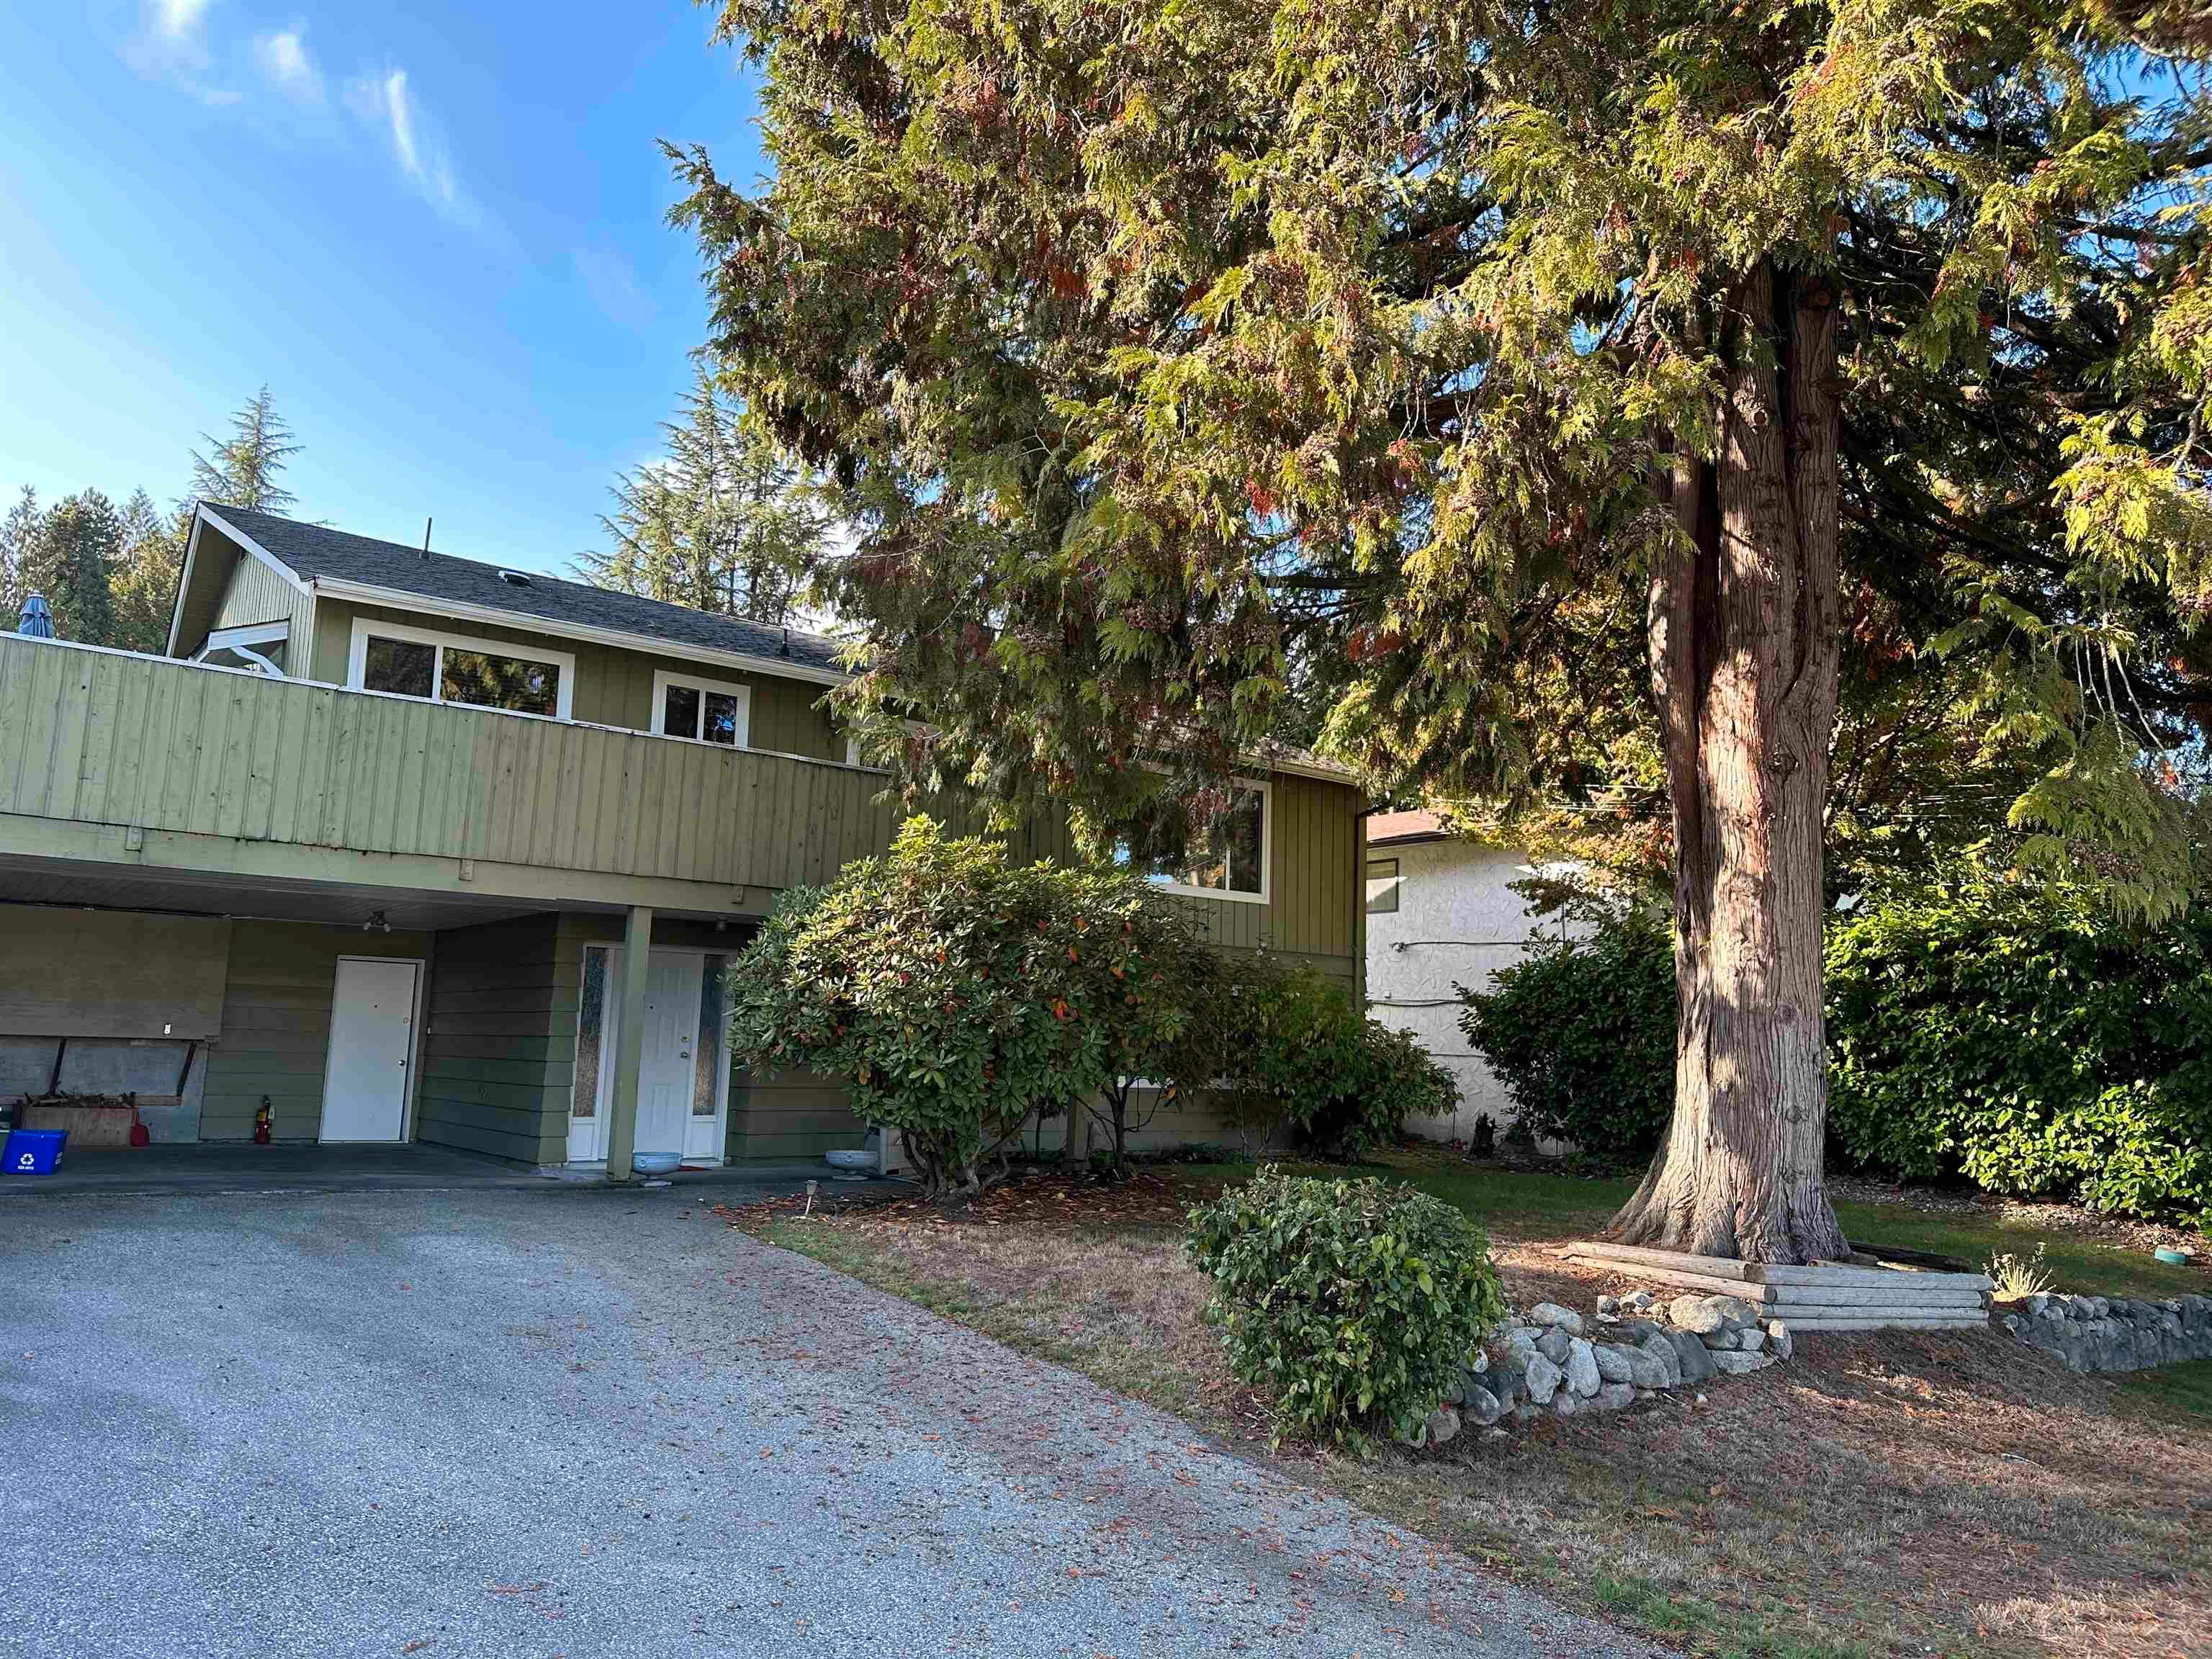 New property listed in Ranch Park, Coquitlam